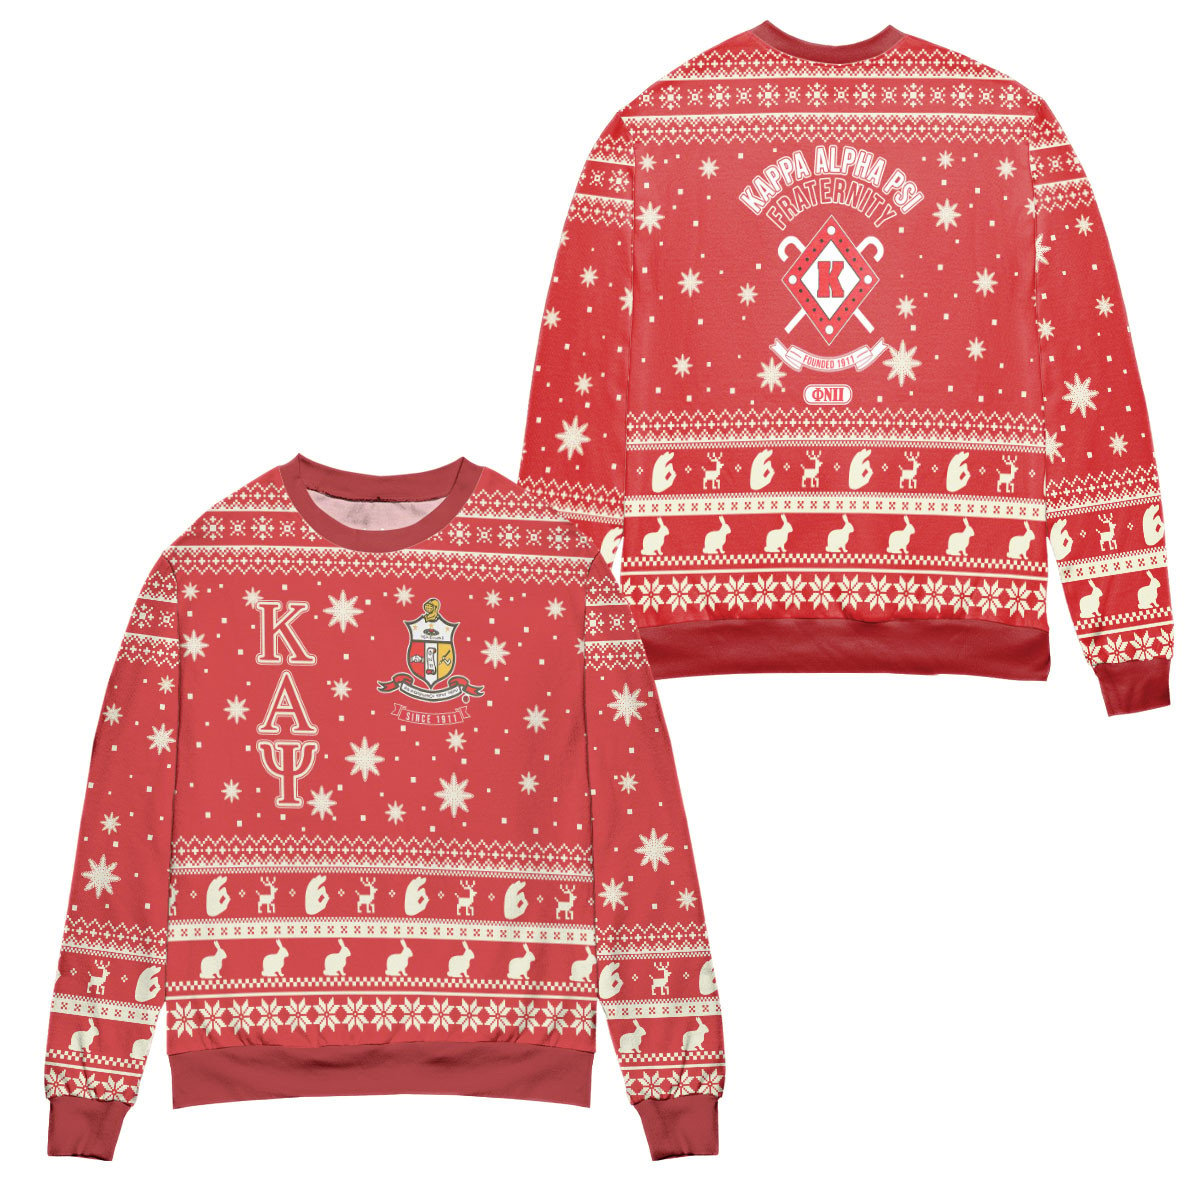 Kappa Alpha Psi Kay Logo Snowflakes Pattern Ugly Christmas Sweater – All Over Print 3D Sweater